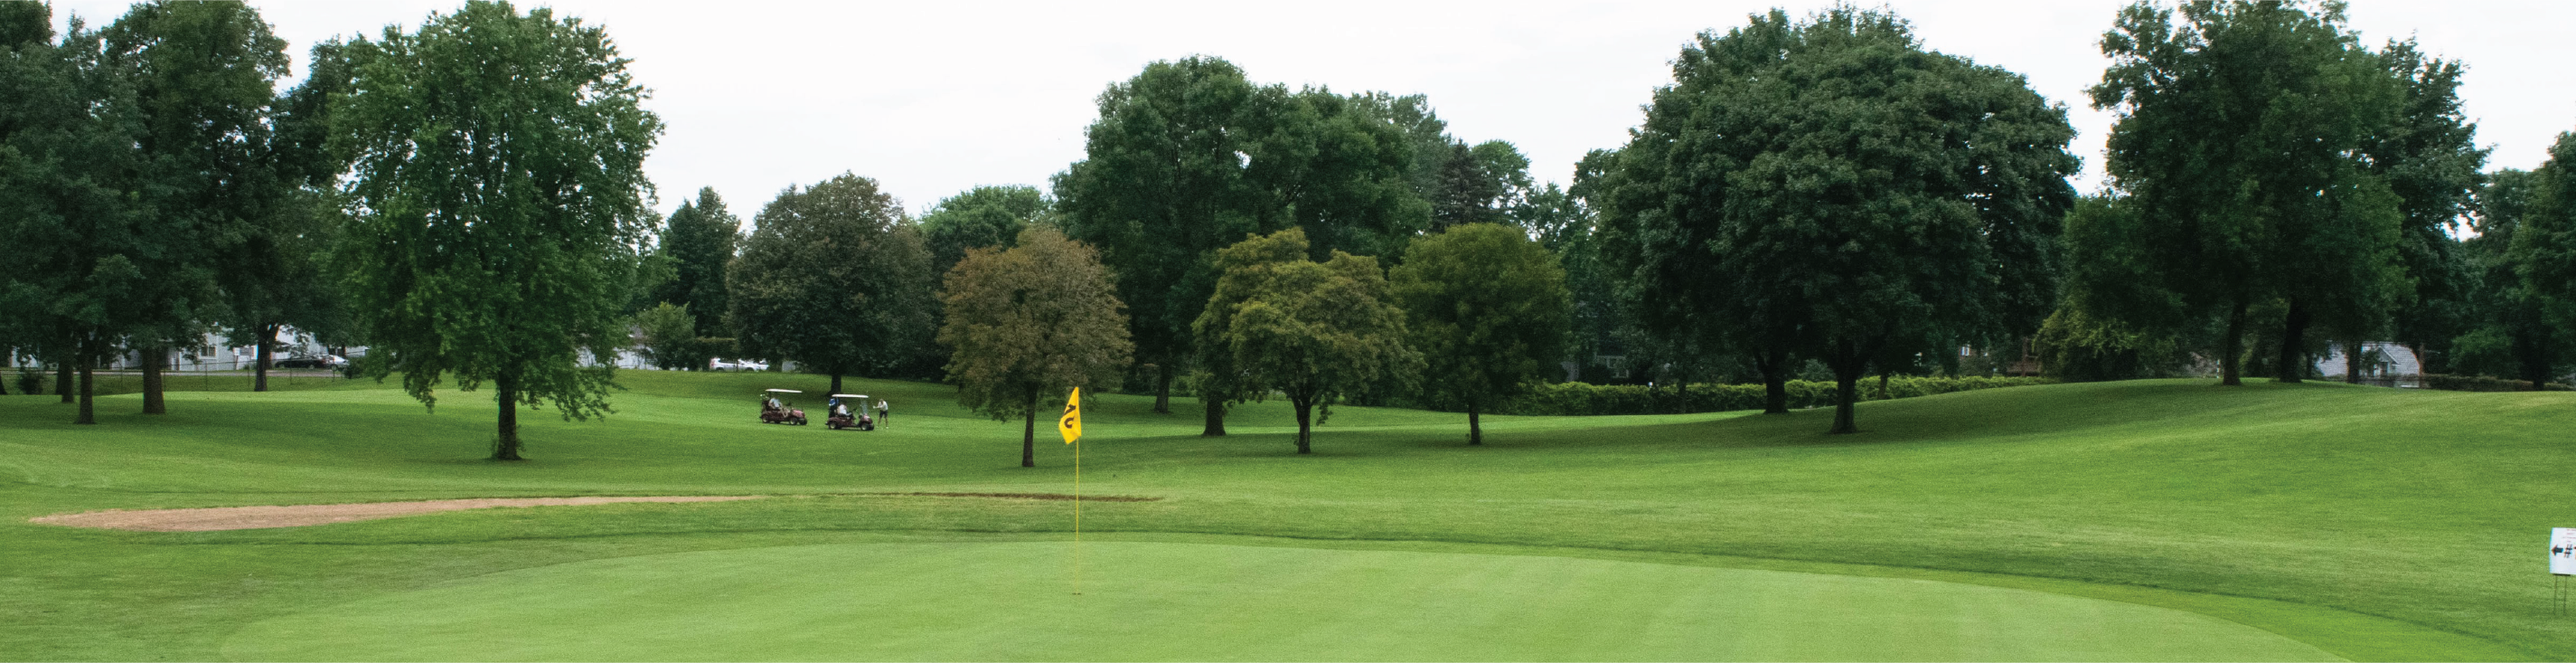 Green of golf course surrounded by trees, yellow flag in middle